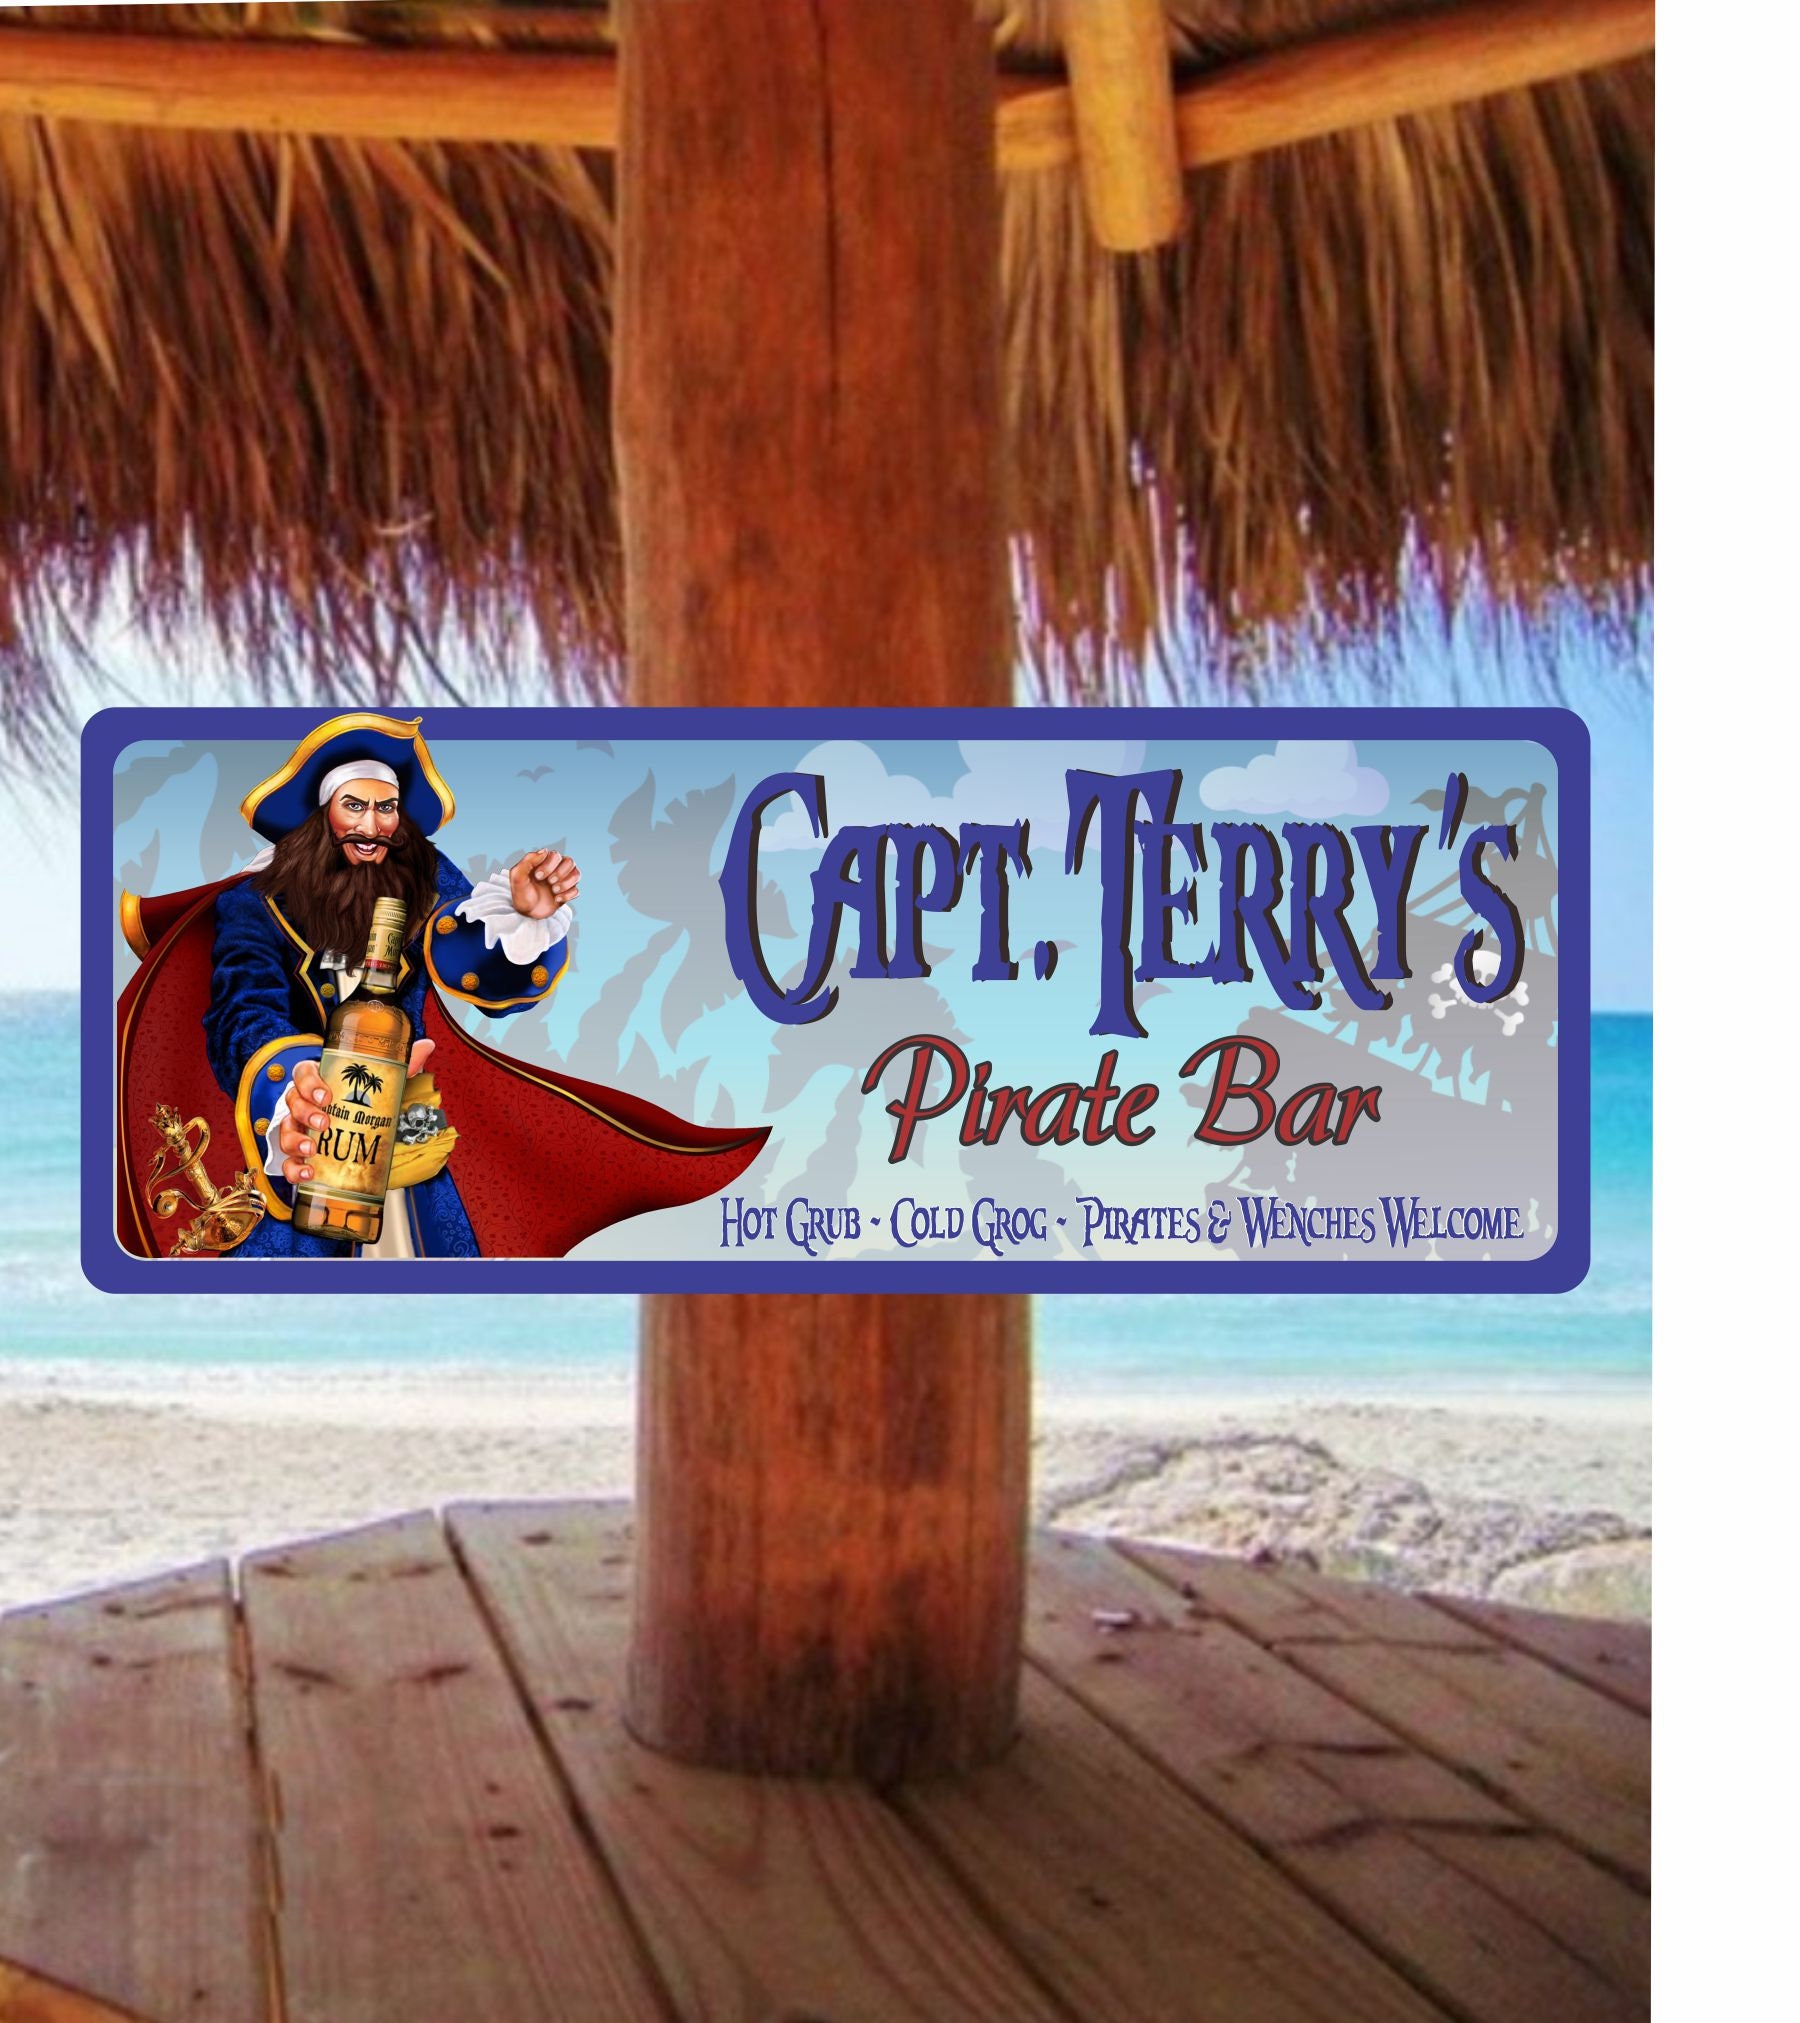 Pirates Quote Pirate Bar Decor, Rum Gifts, Rum Decor, Pirate Themed Gifts,  Boat Life, Last Name Personalized Sign Decor 28x11 